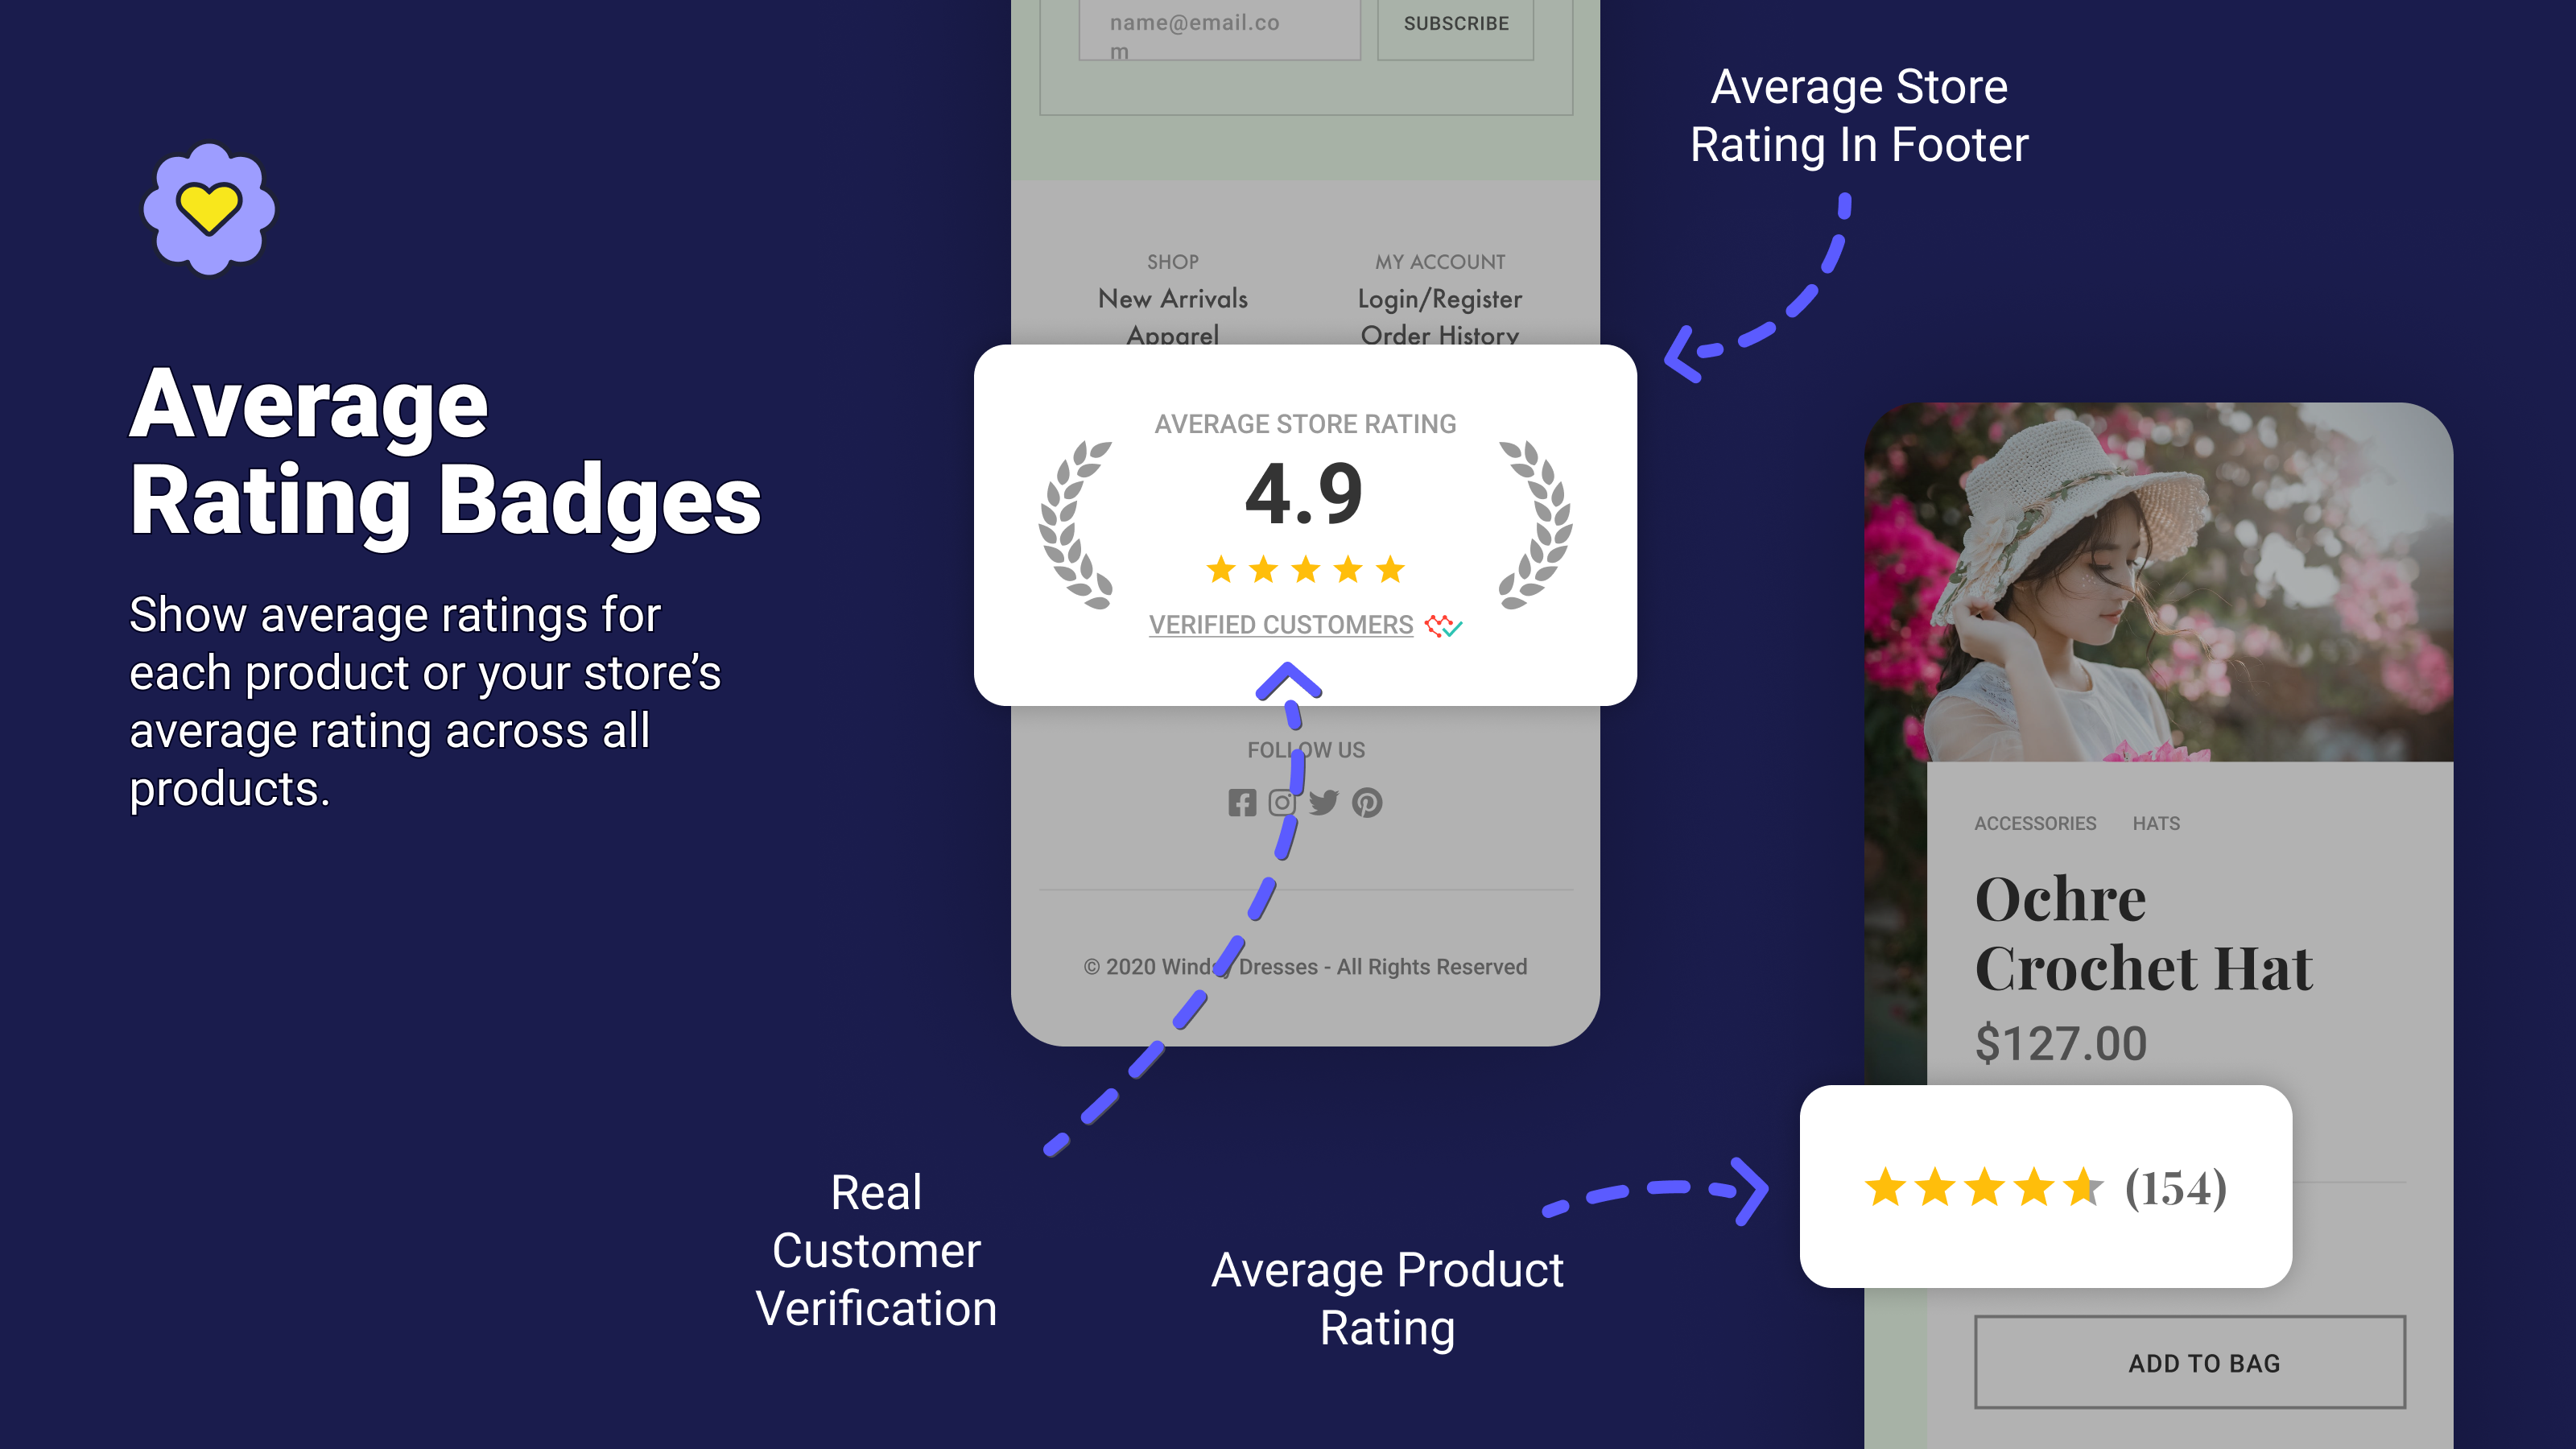 Show average rating badges in footer, collection page, or product page.